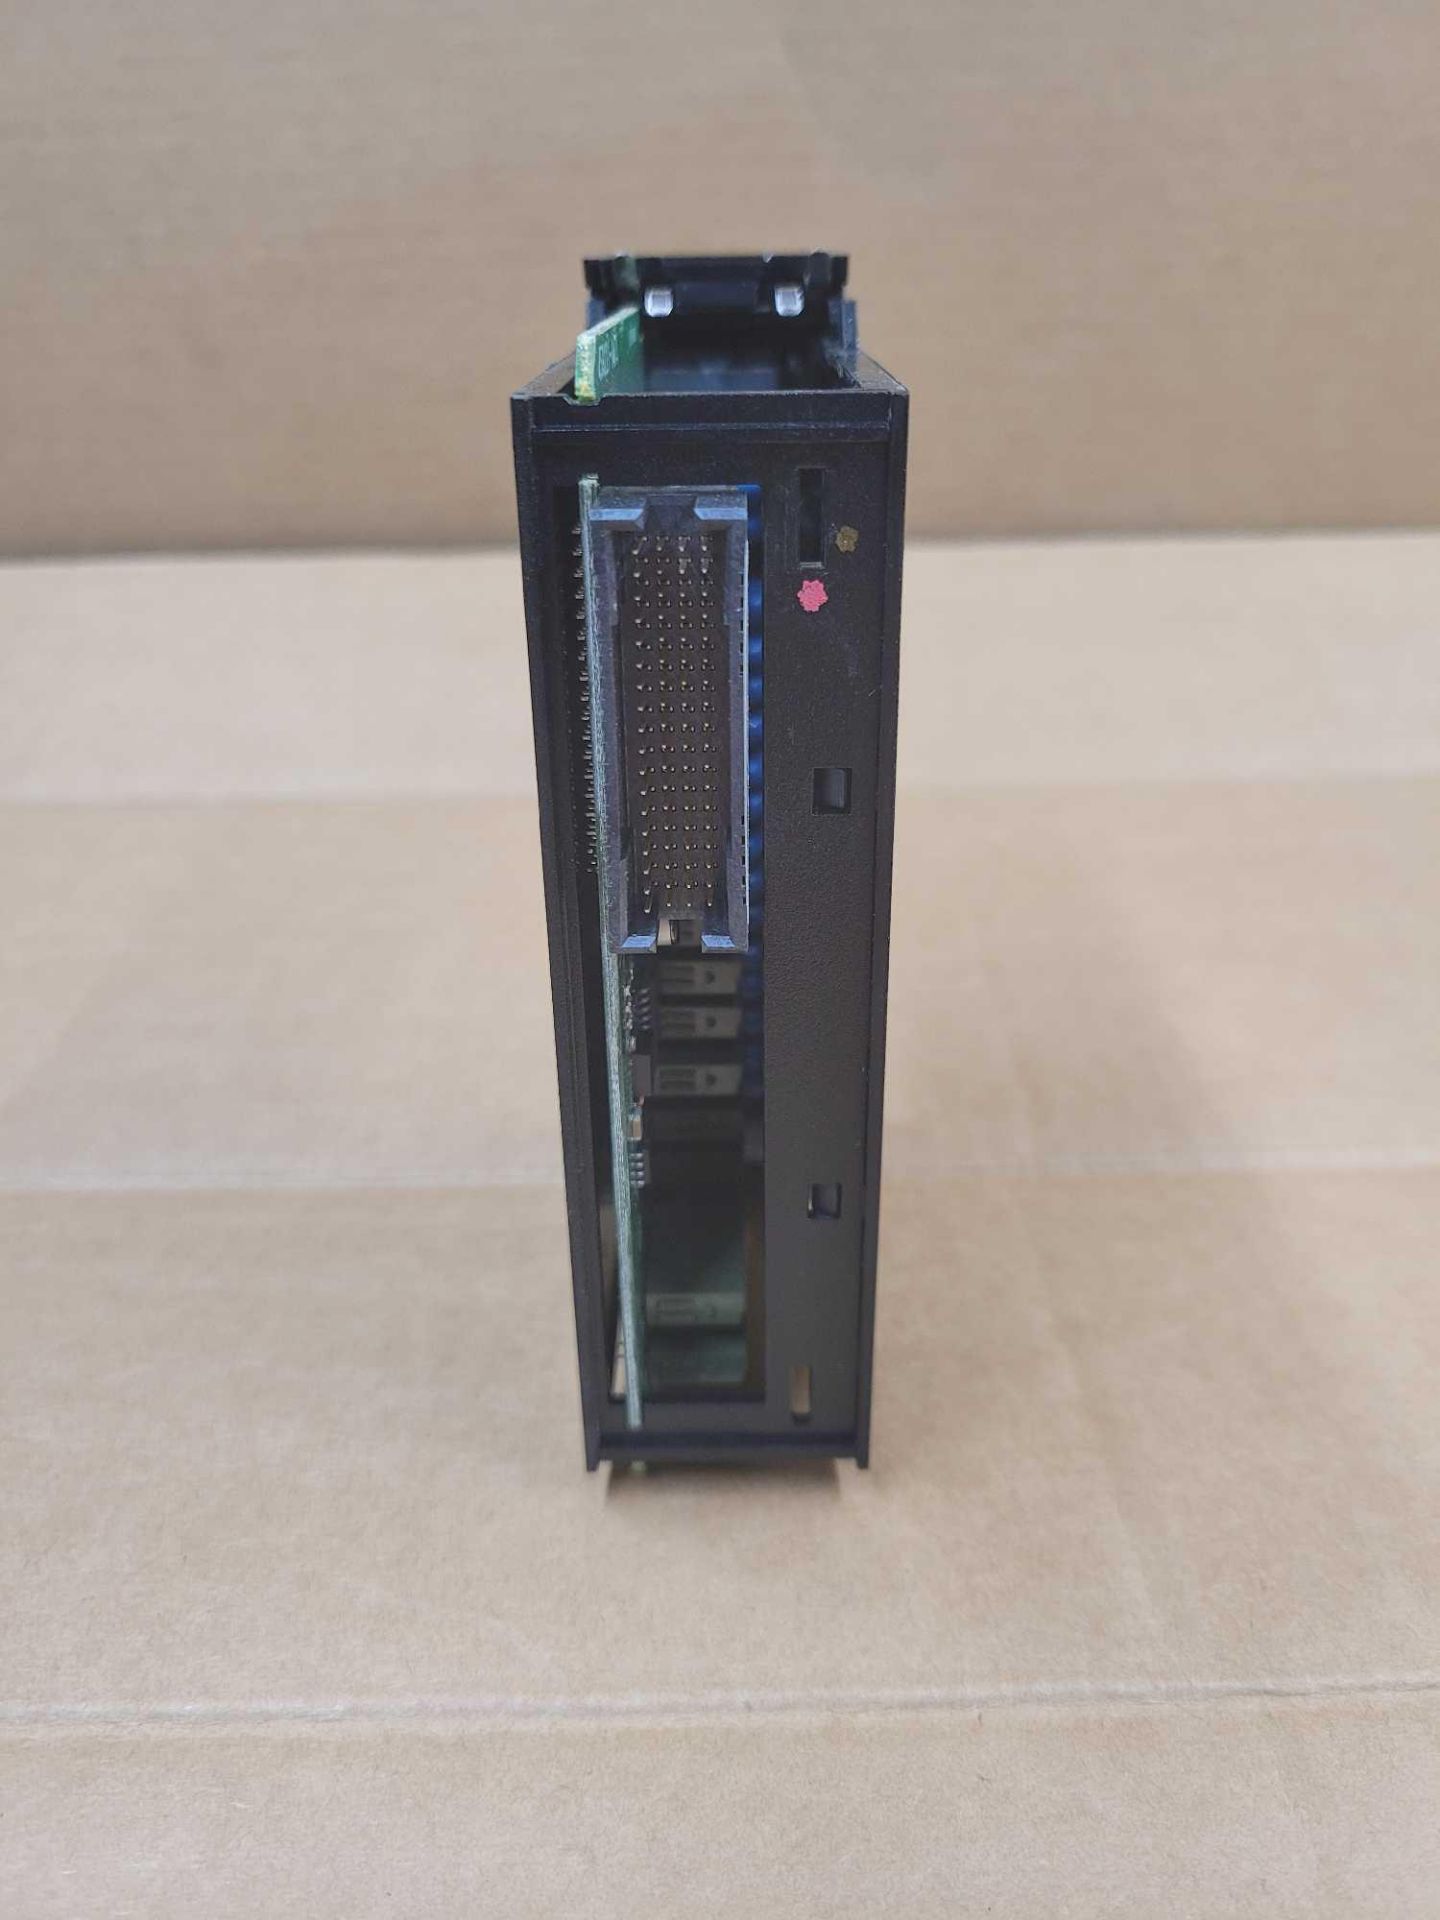 ALLEN BRADLEY 1756-OW16I / Series A Isolated Relay Output Module  /  Lot Weight: 0.6 lbs - Image 3 of 6